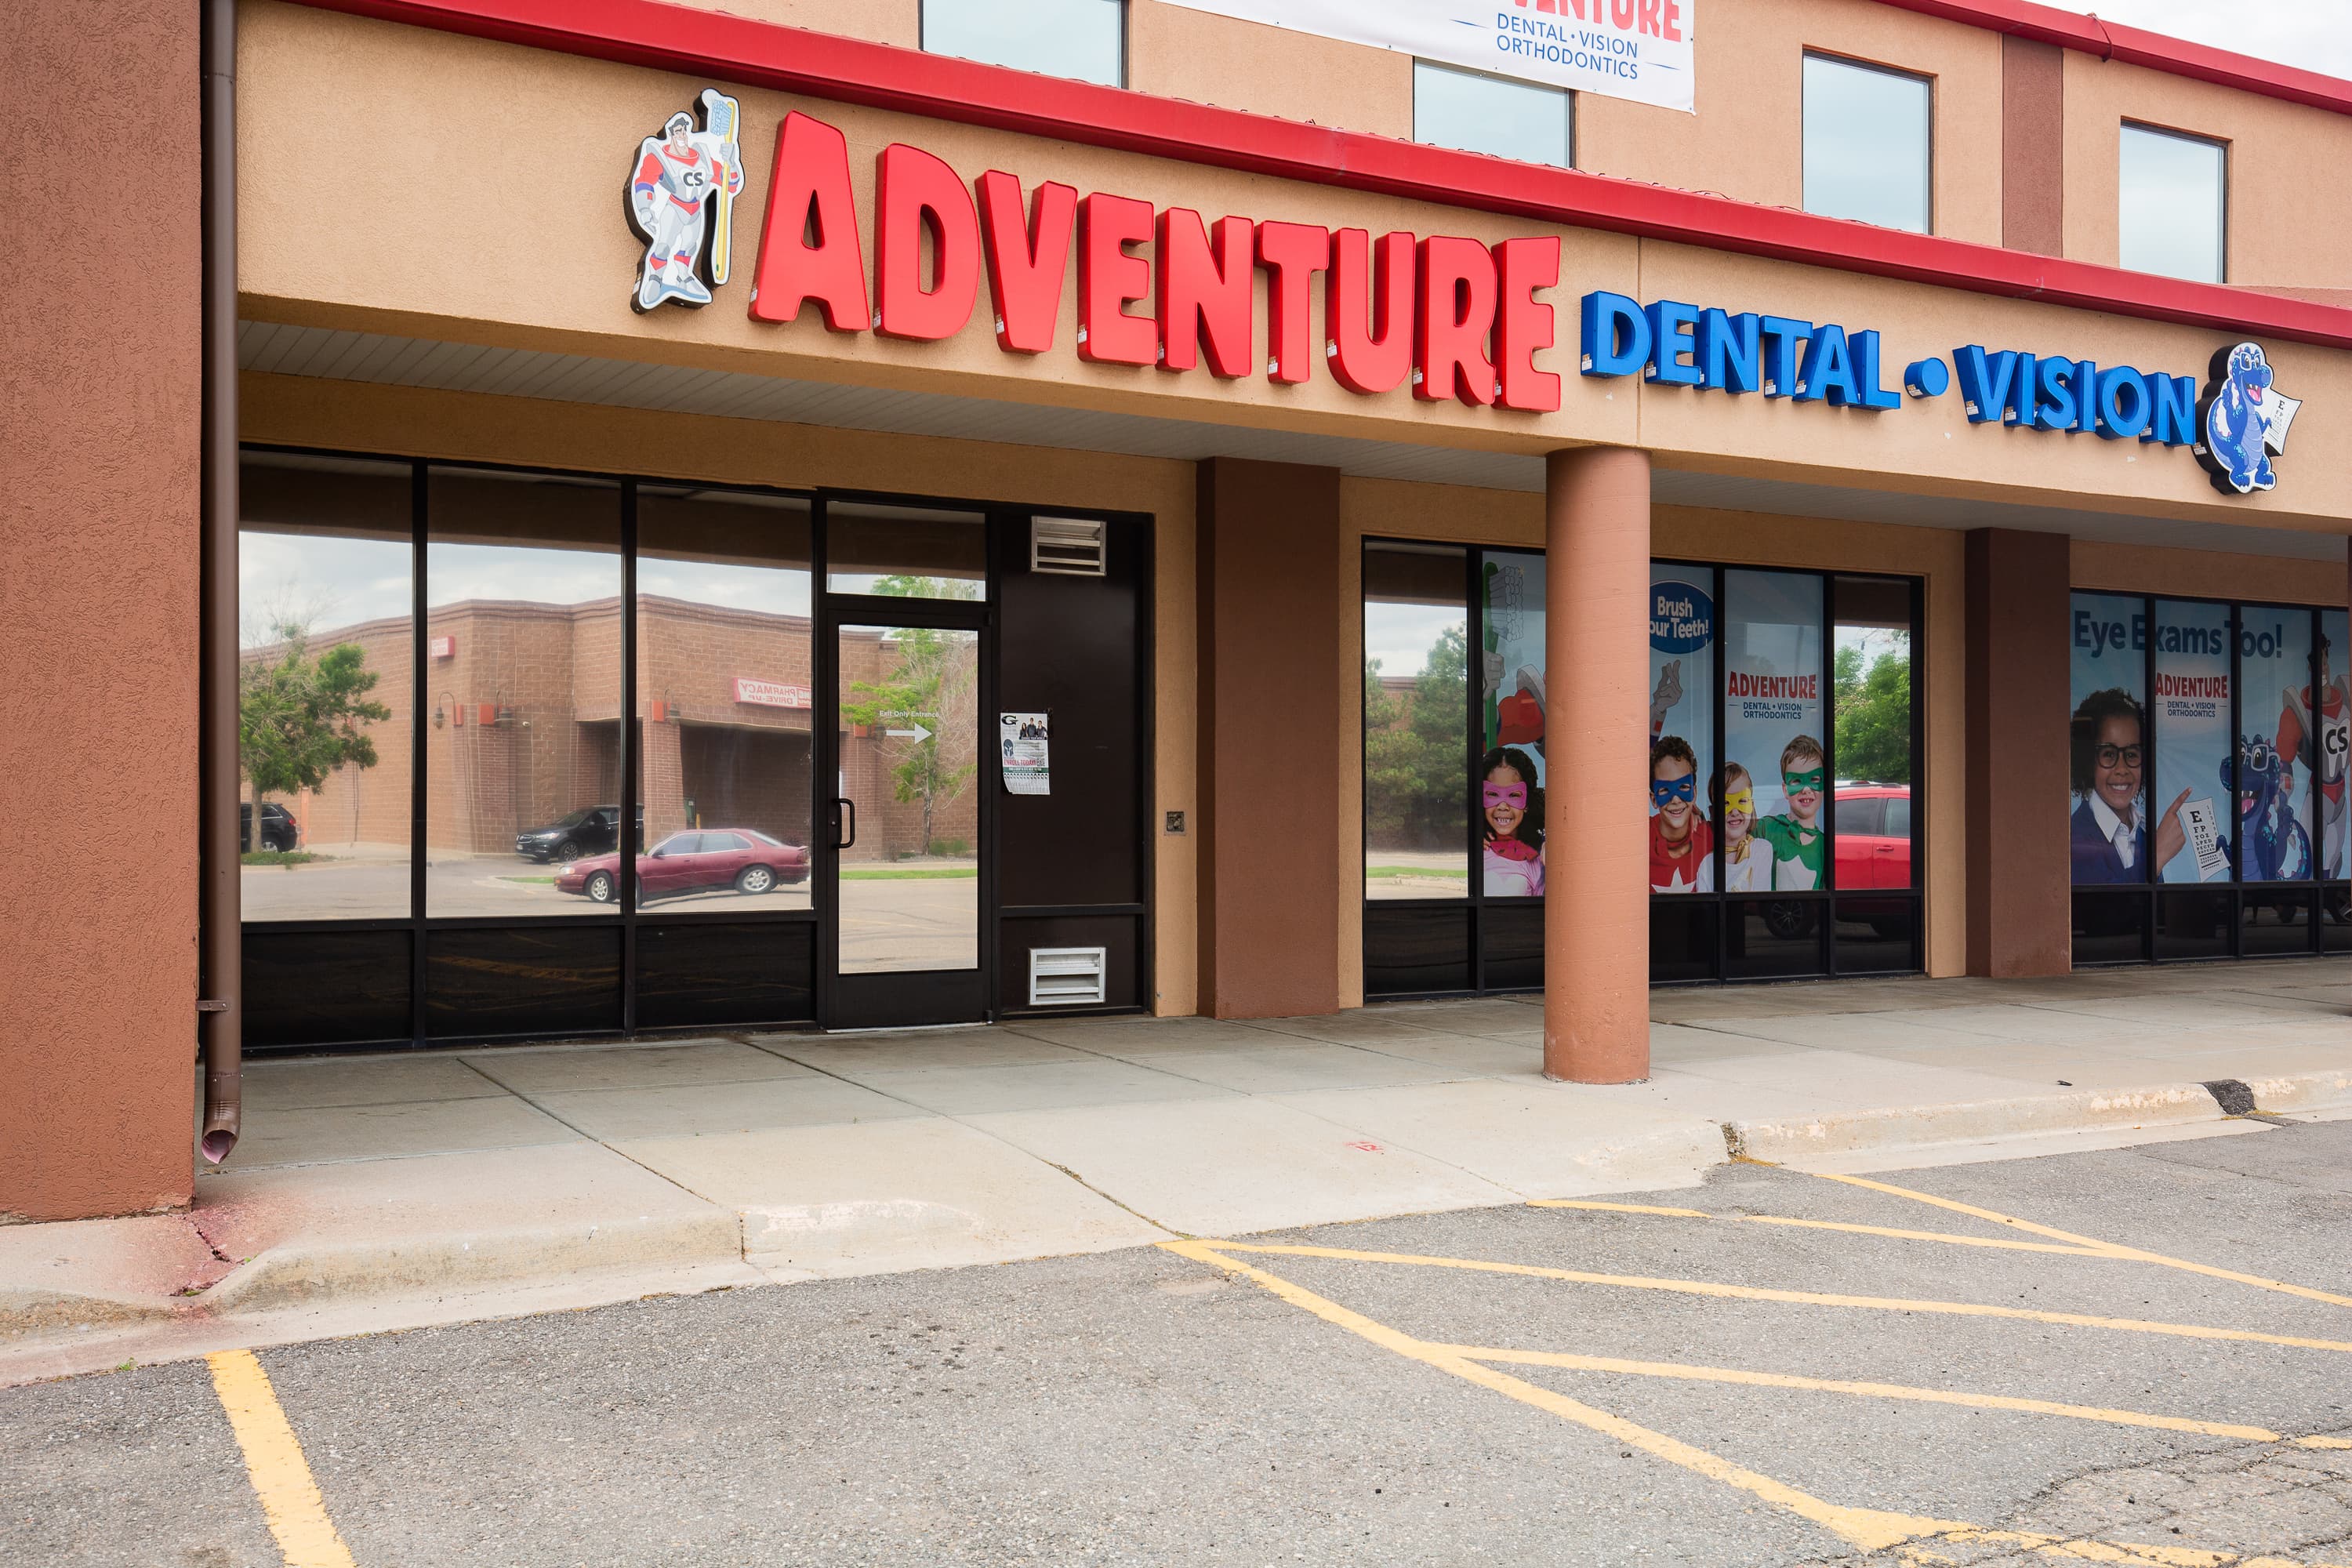 exterior of building with a sign that says Adventure Dental and Vision